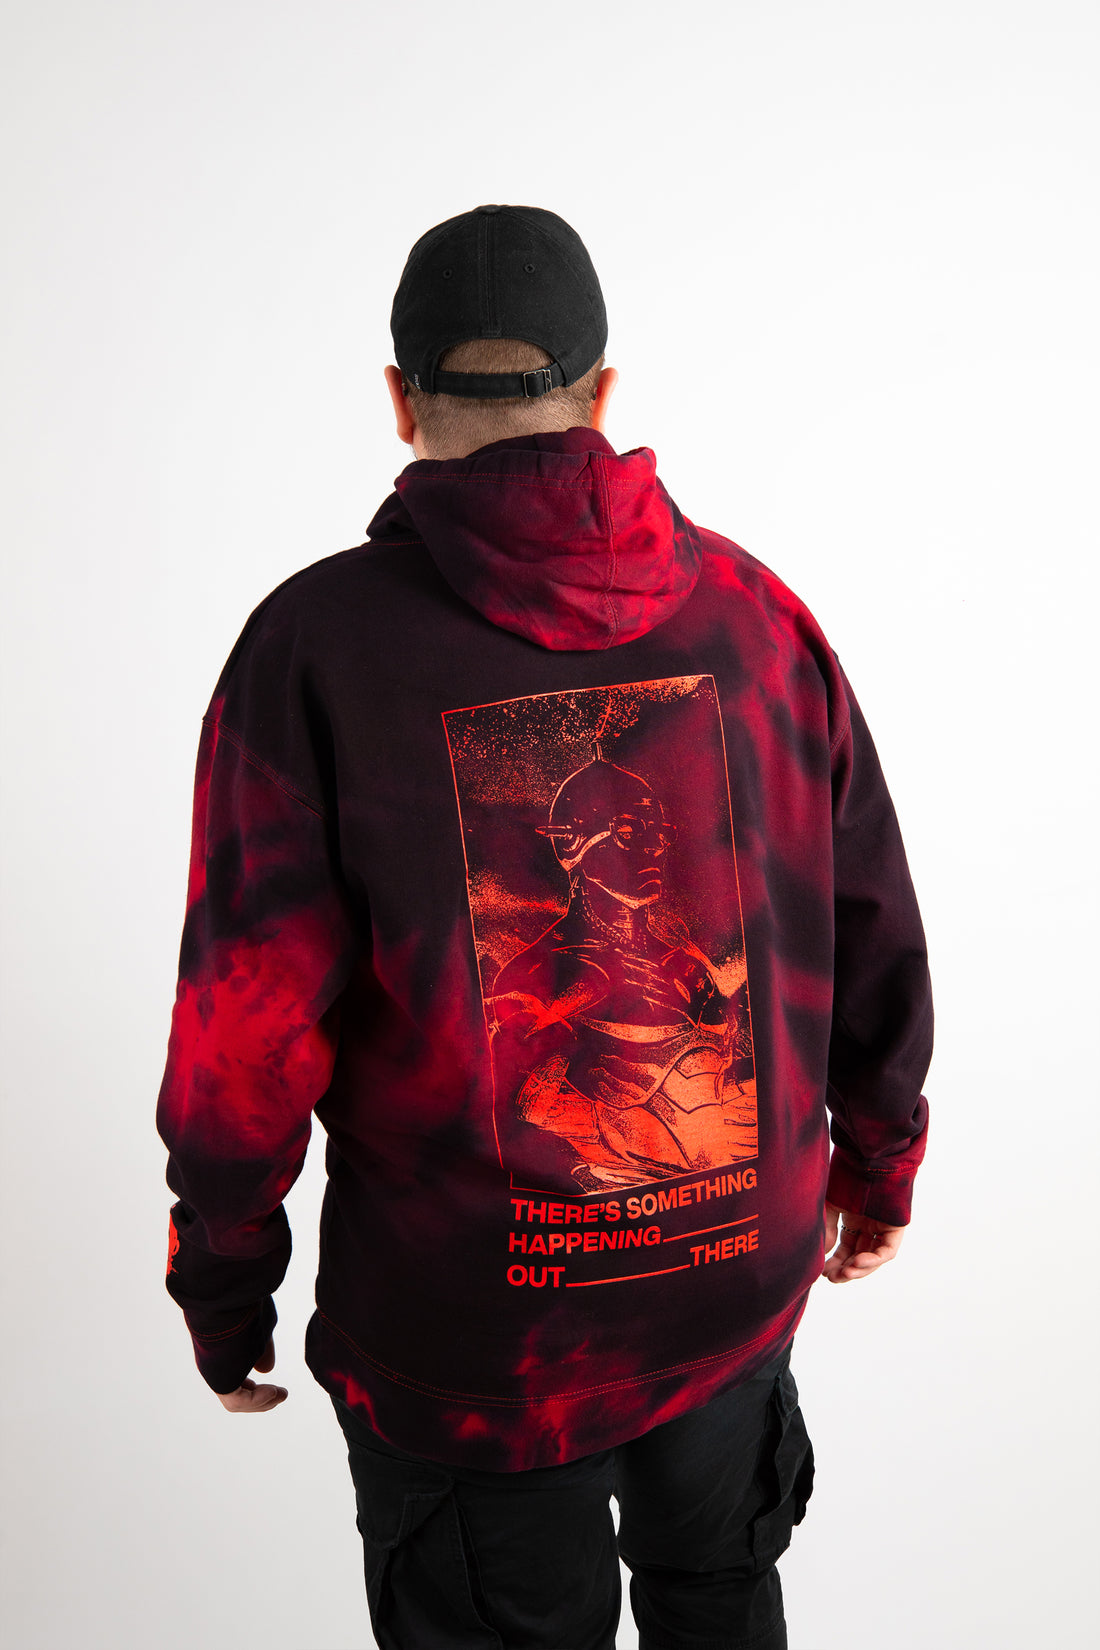 Ray Volpe - Volpetron Ascends - Tie Dye Hoodie